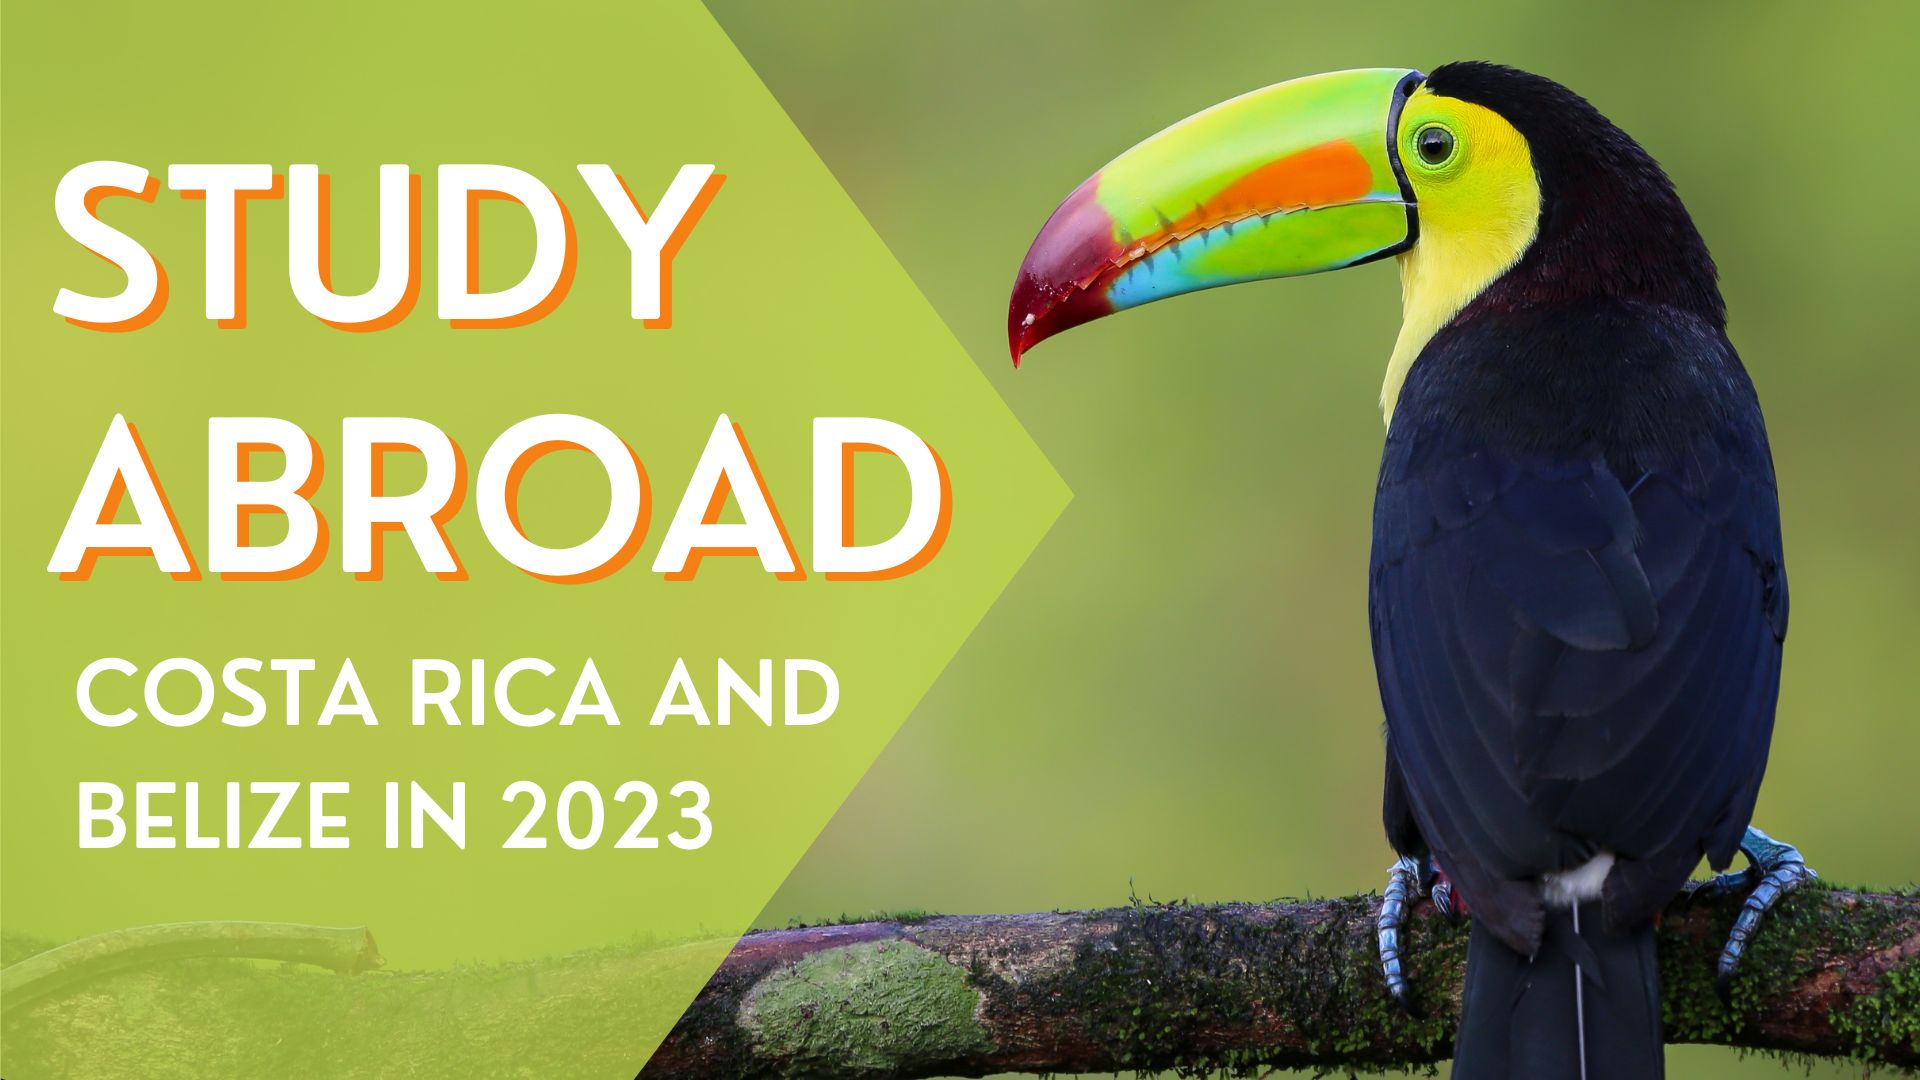 Study abroad in Costa Rica or Belize